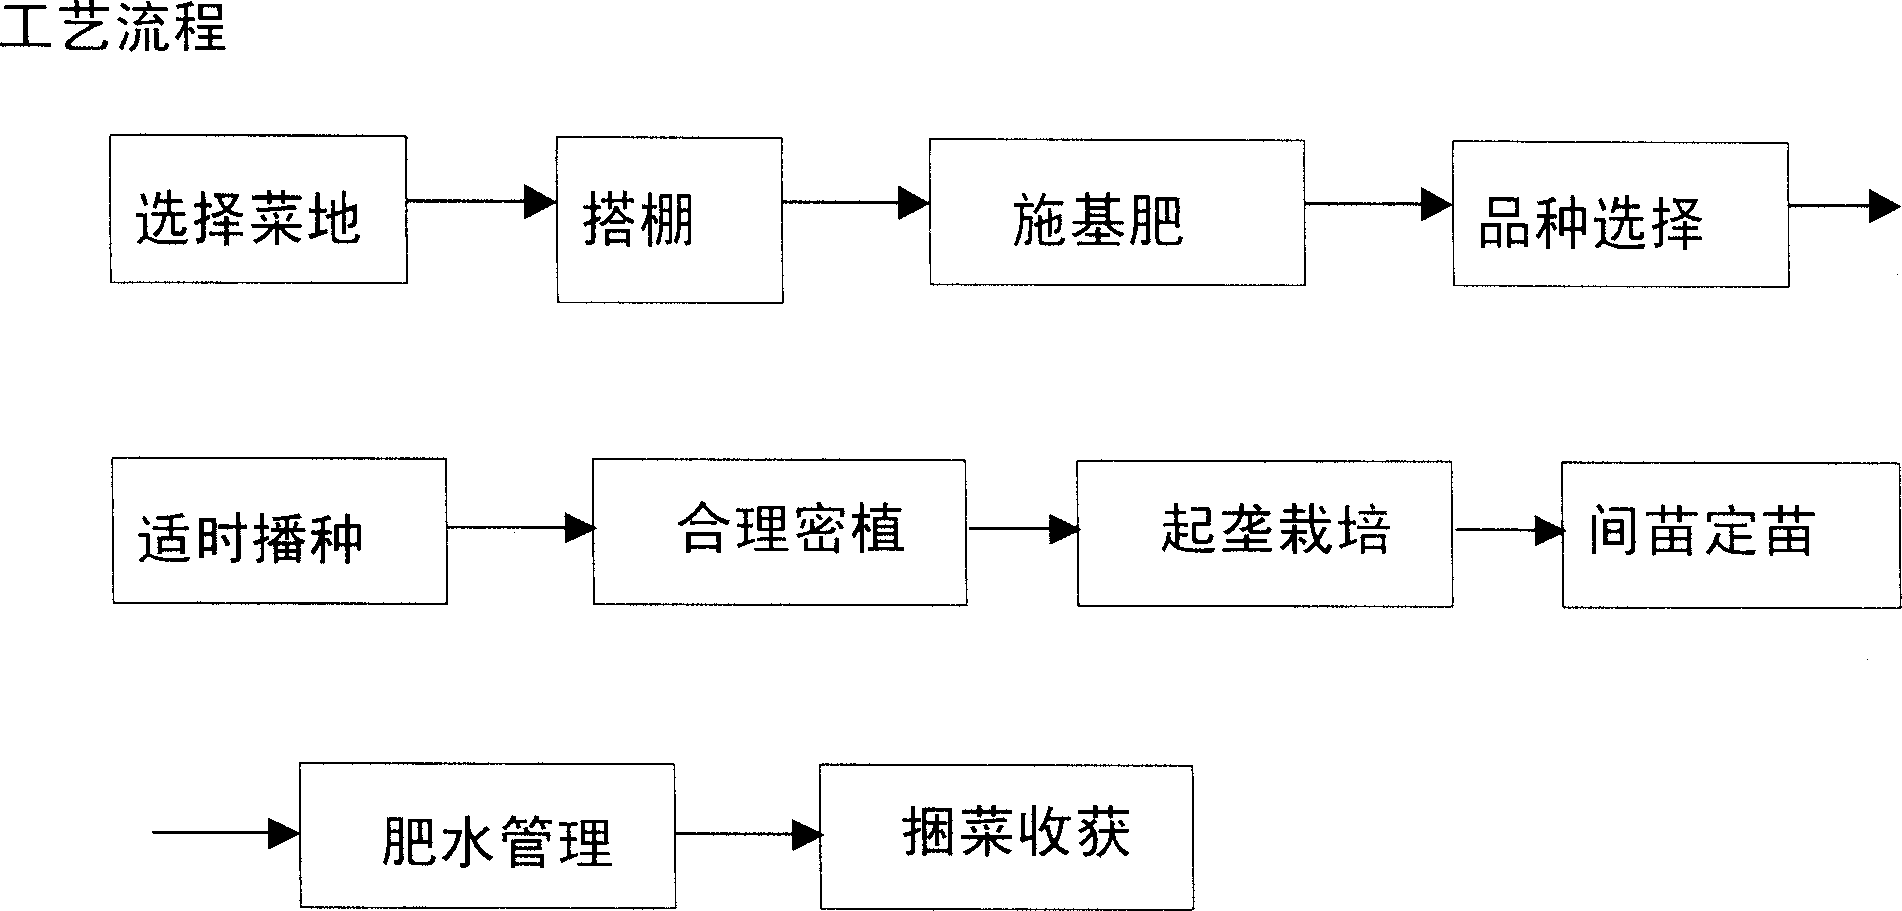 Technique for cultivating celery cabbage of Huaiyang series